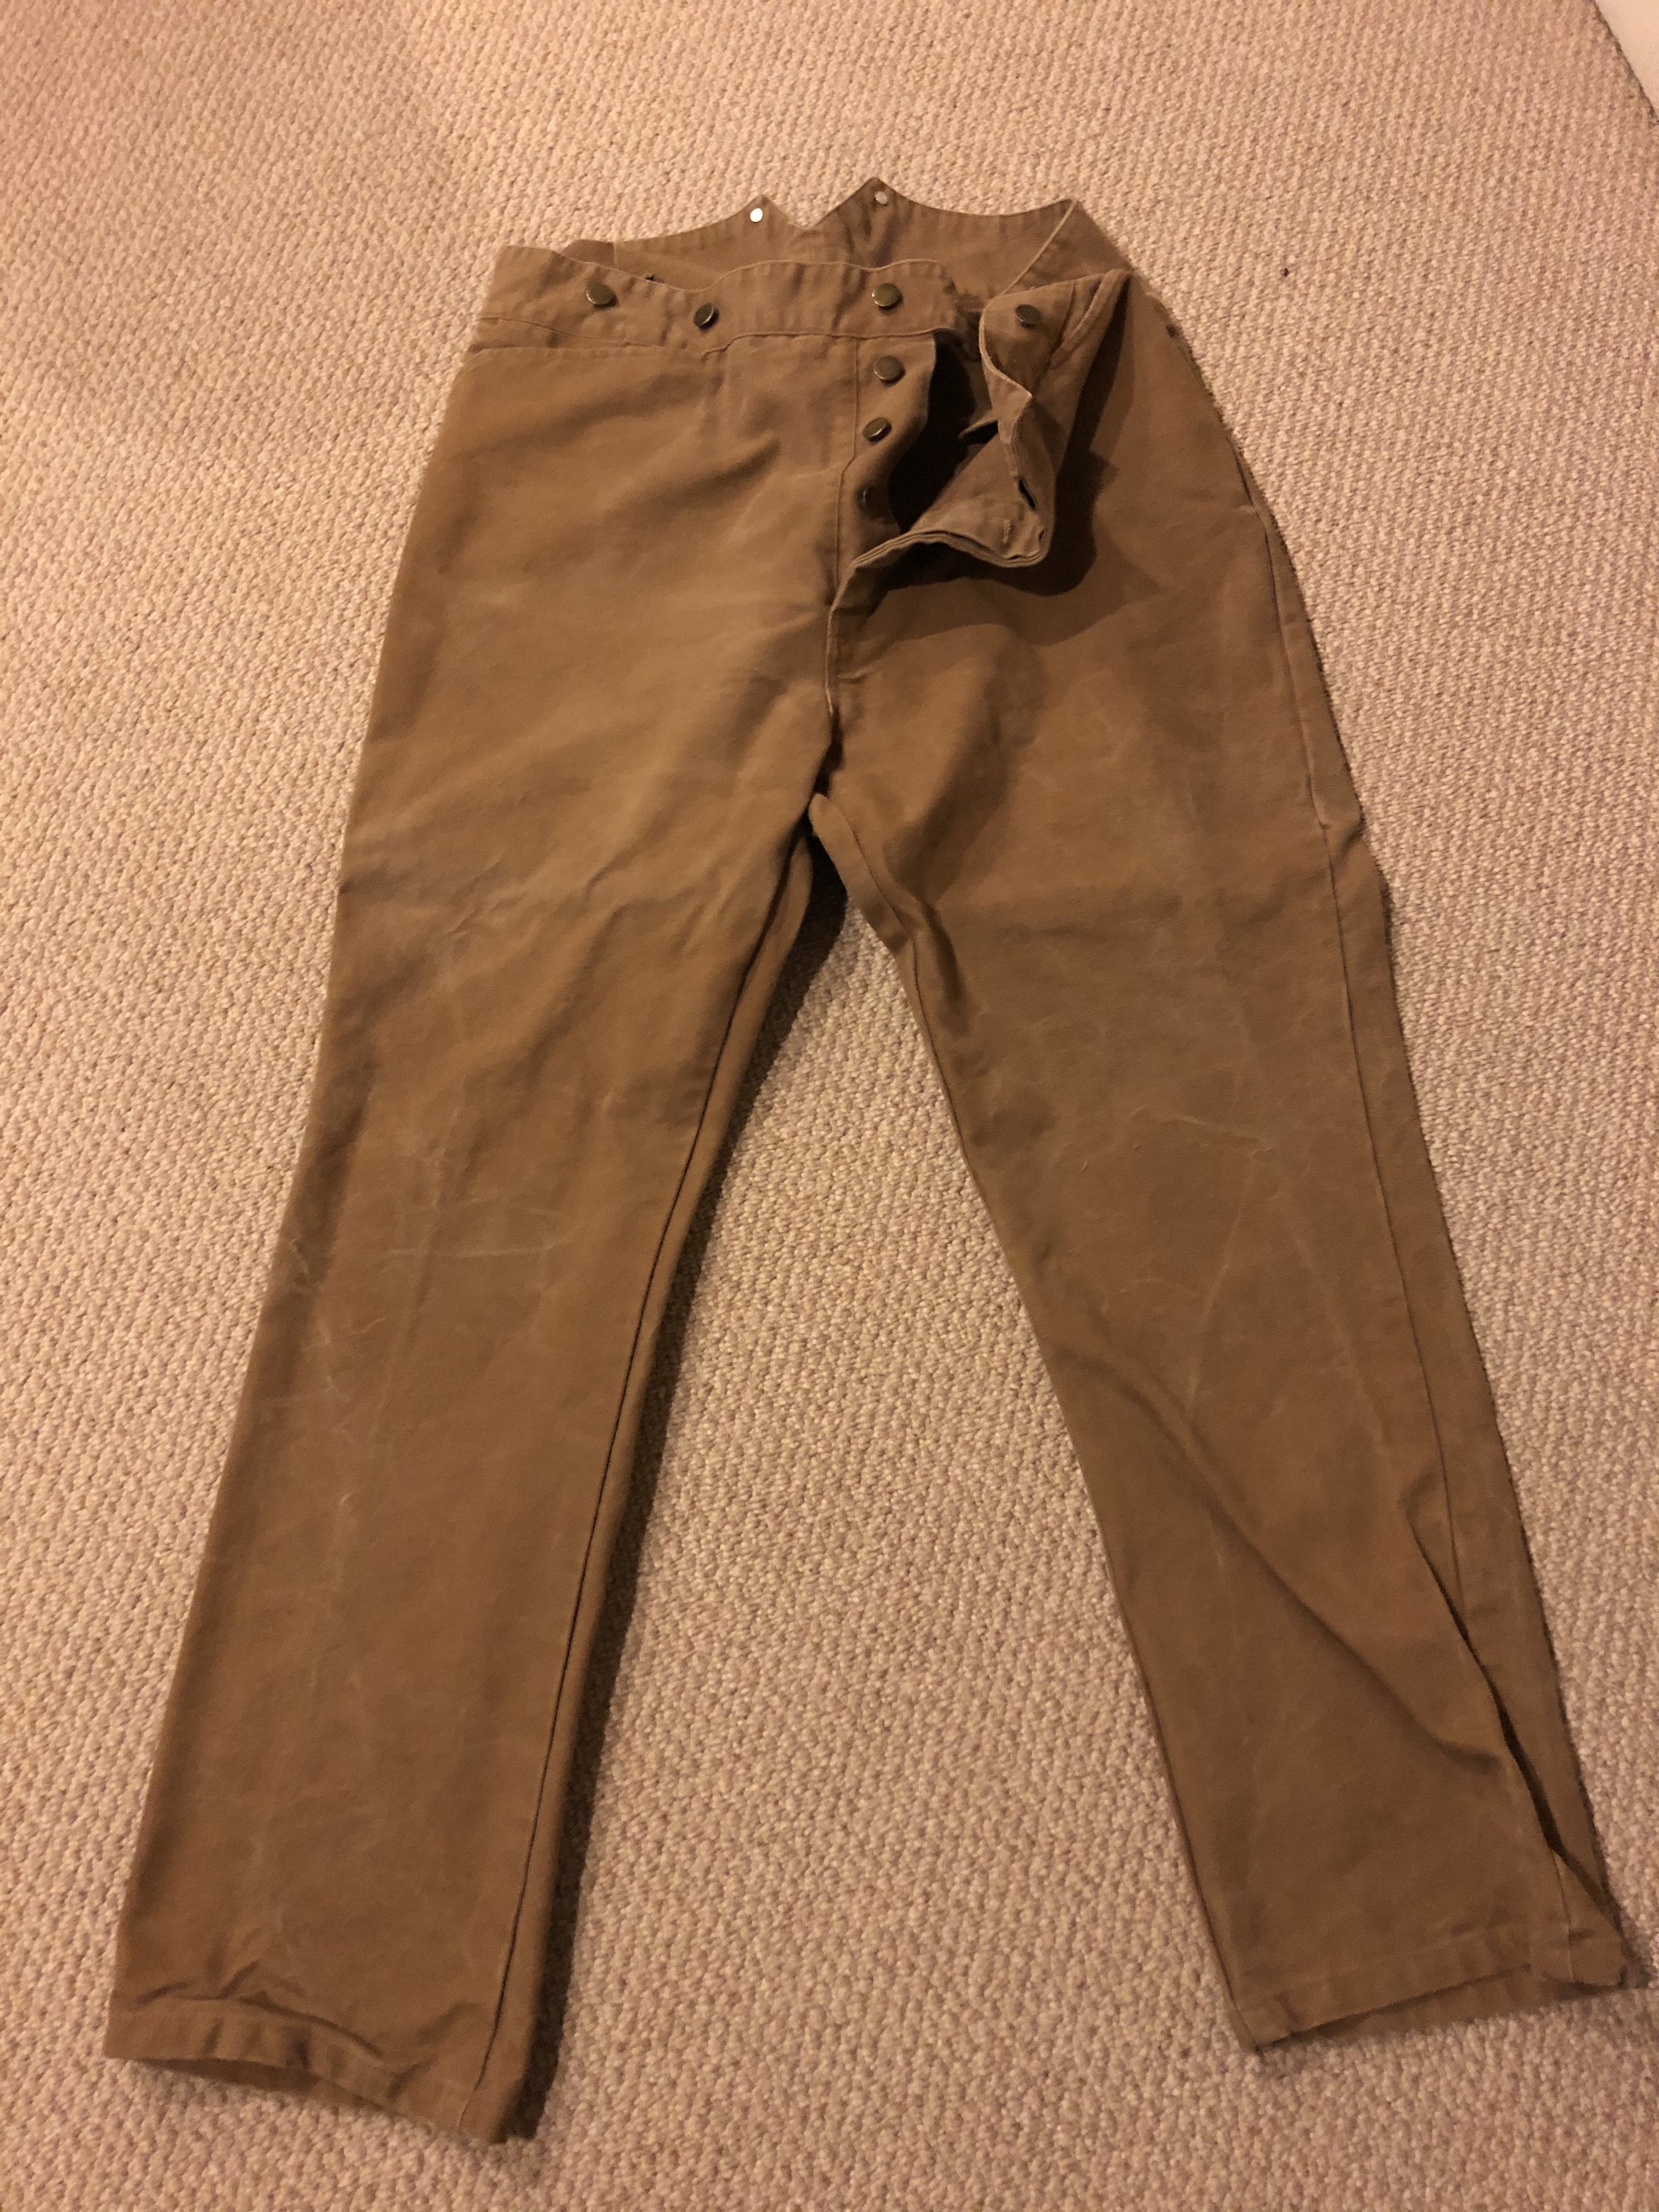 WTS Cowboy cloths (pants) SPF - SASS Wire Classifieds - SASS Wire Forum